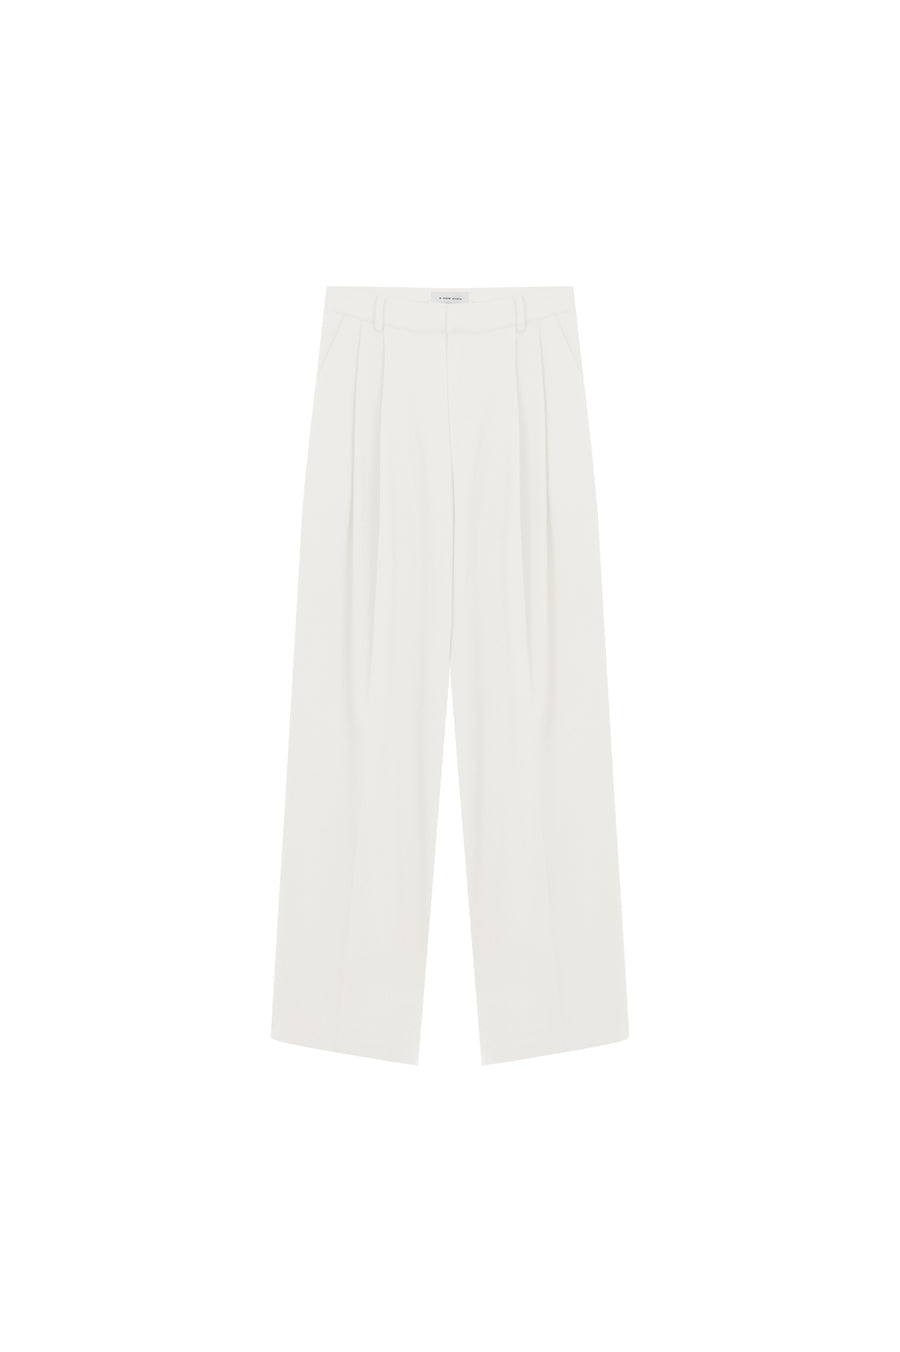 The Marcel white pants